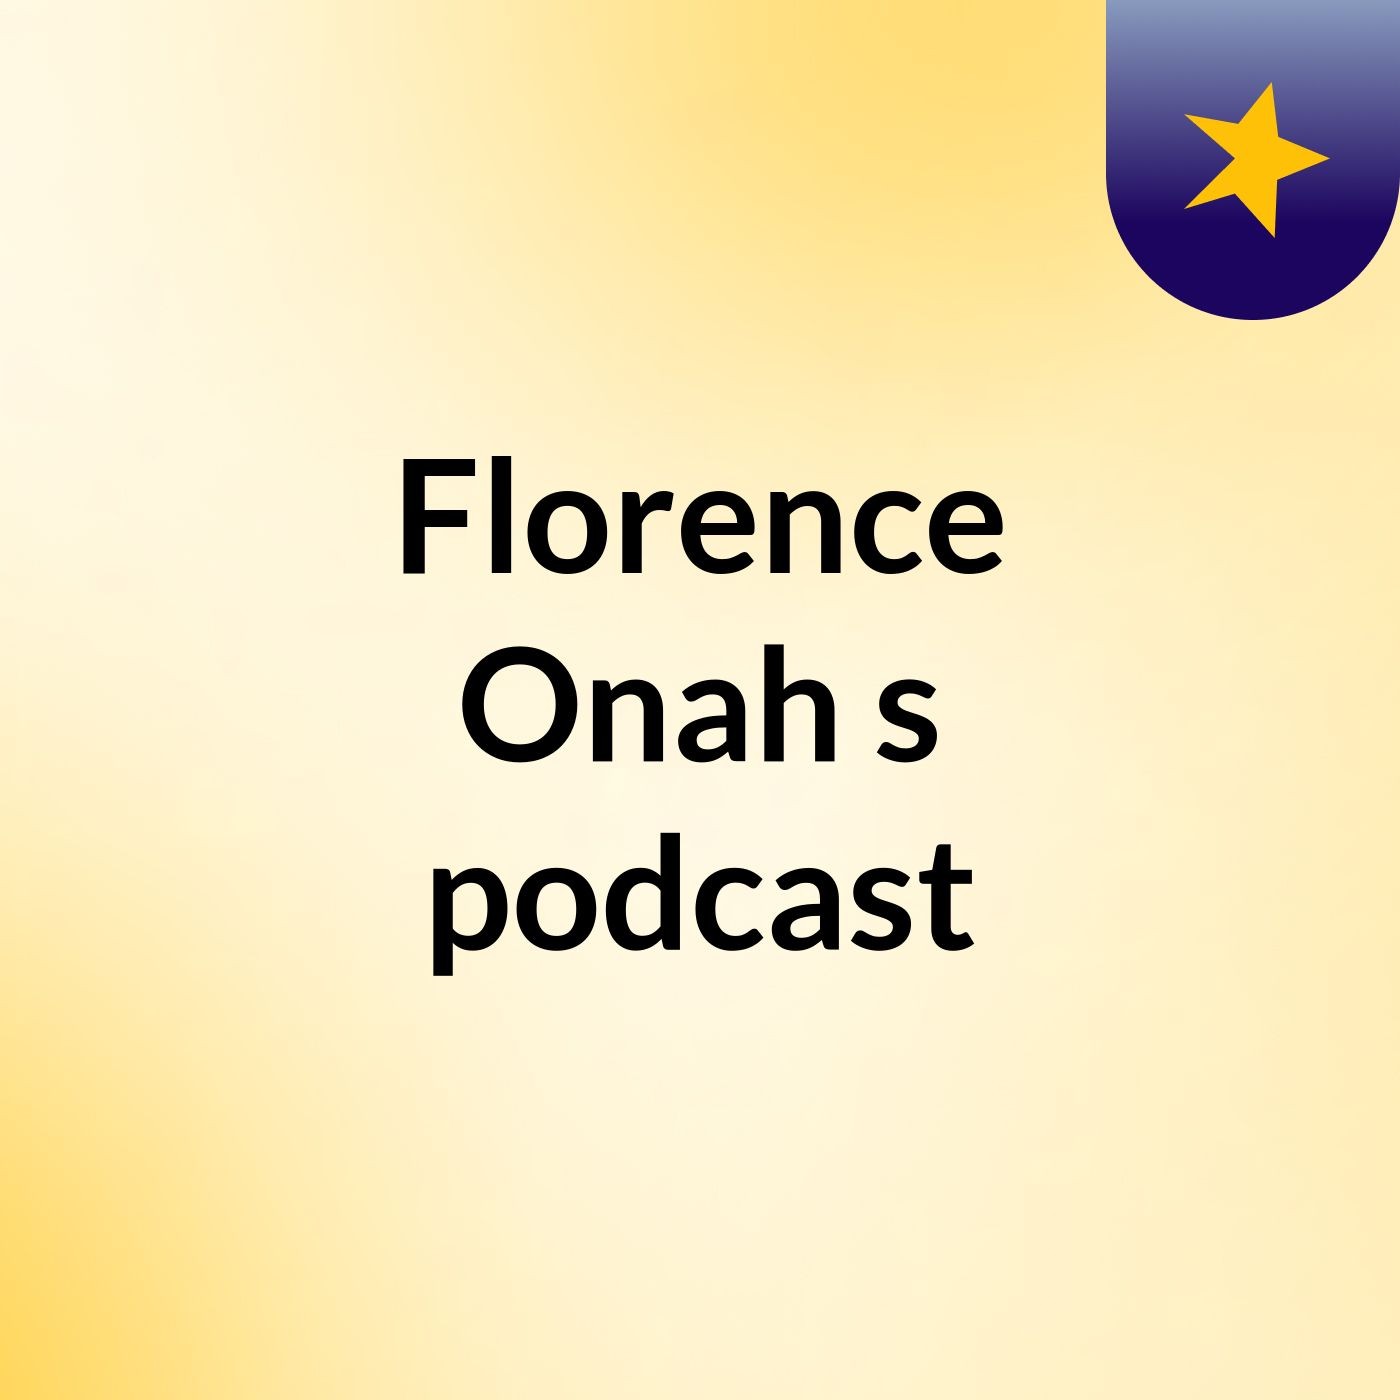 Florence Onah's podcast